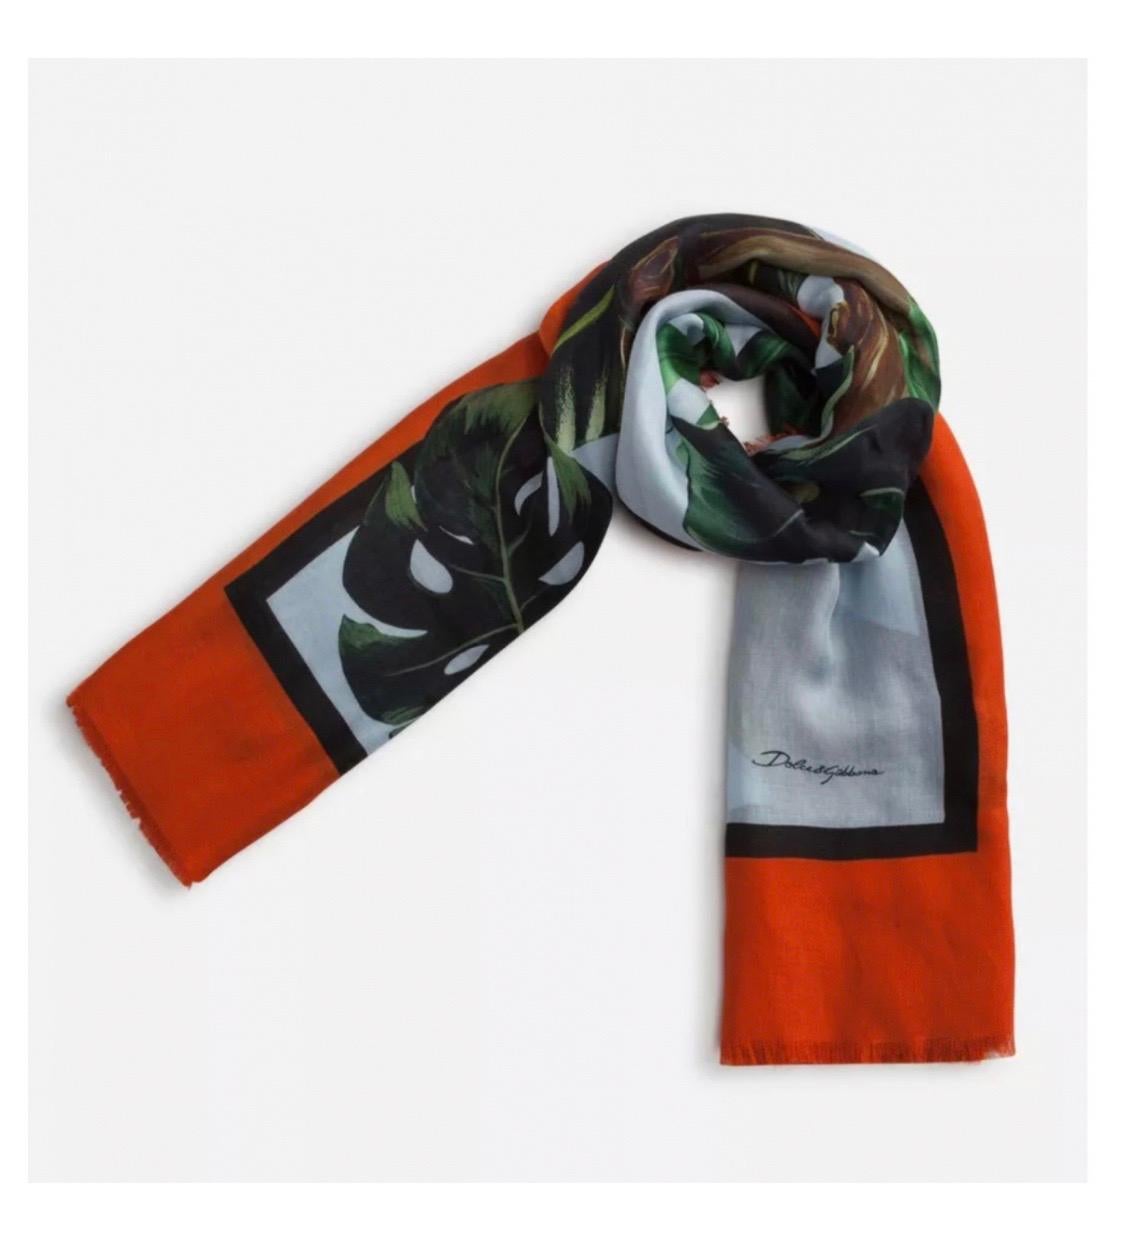 Dolce & Gabbana Jungle Leopard
scarf made of cashmere and modal
with a print inspired by the jungle and
natural wilderness:
- Unfringed edges
- Measurements: 140 x 140cm- 55 x 55
inches
- Made in Italy
10% Cashmere 90%Modal
Brand new with